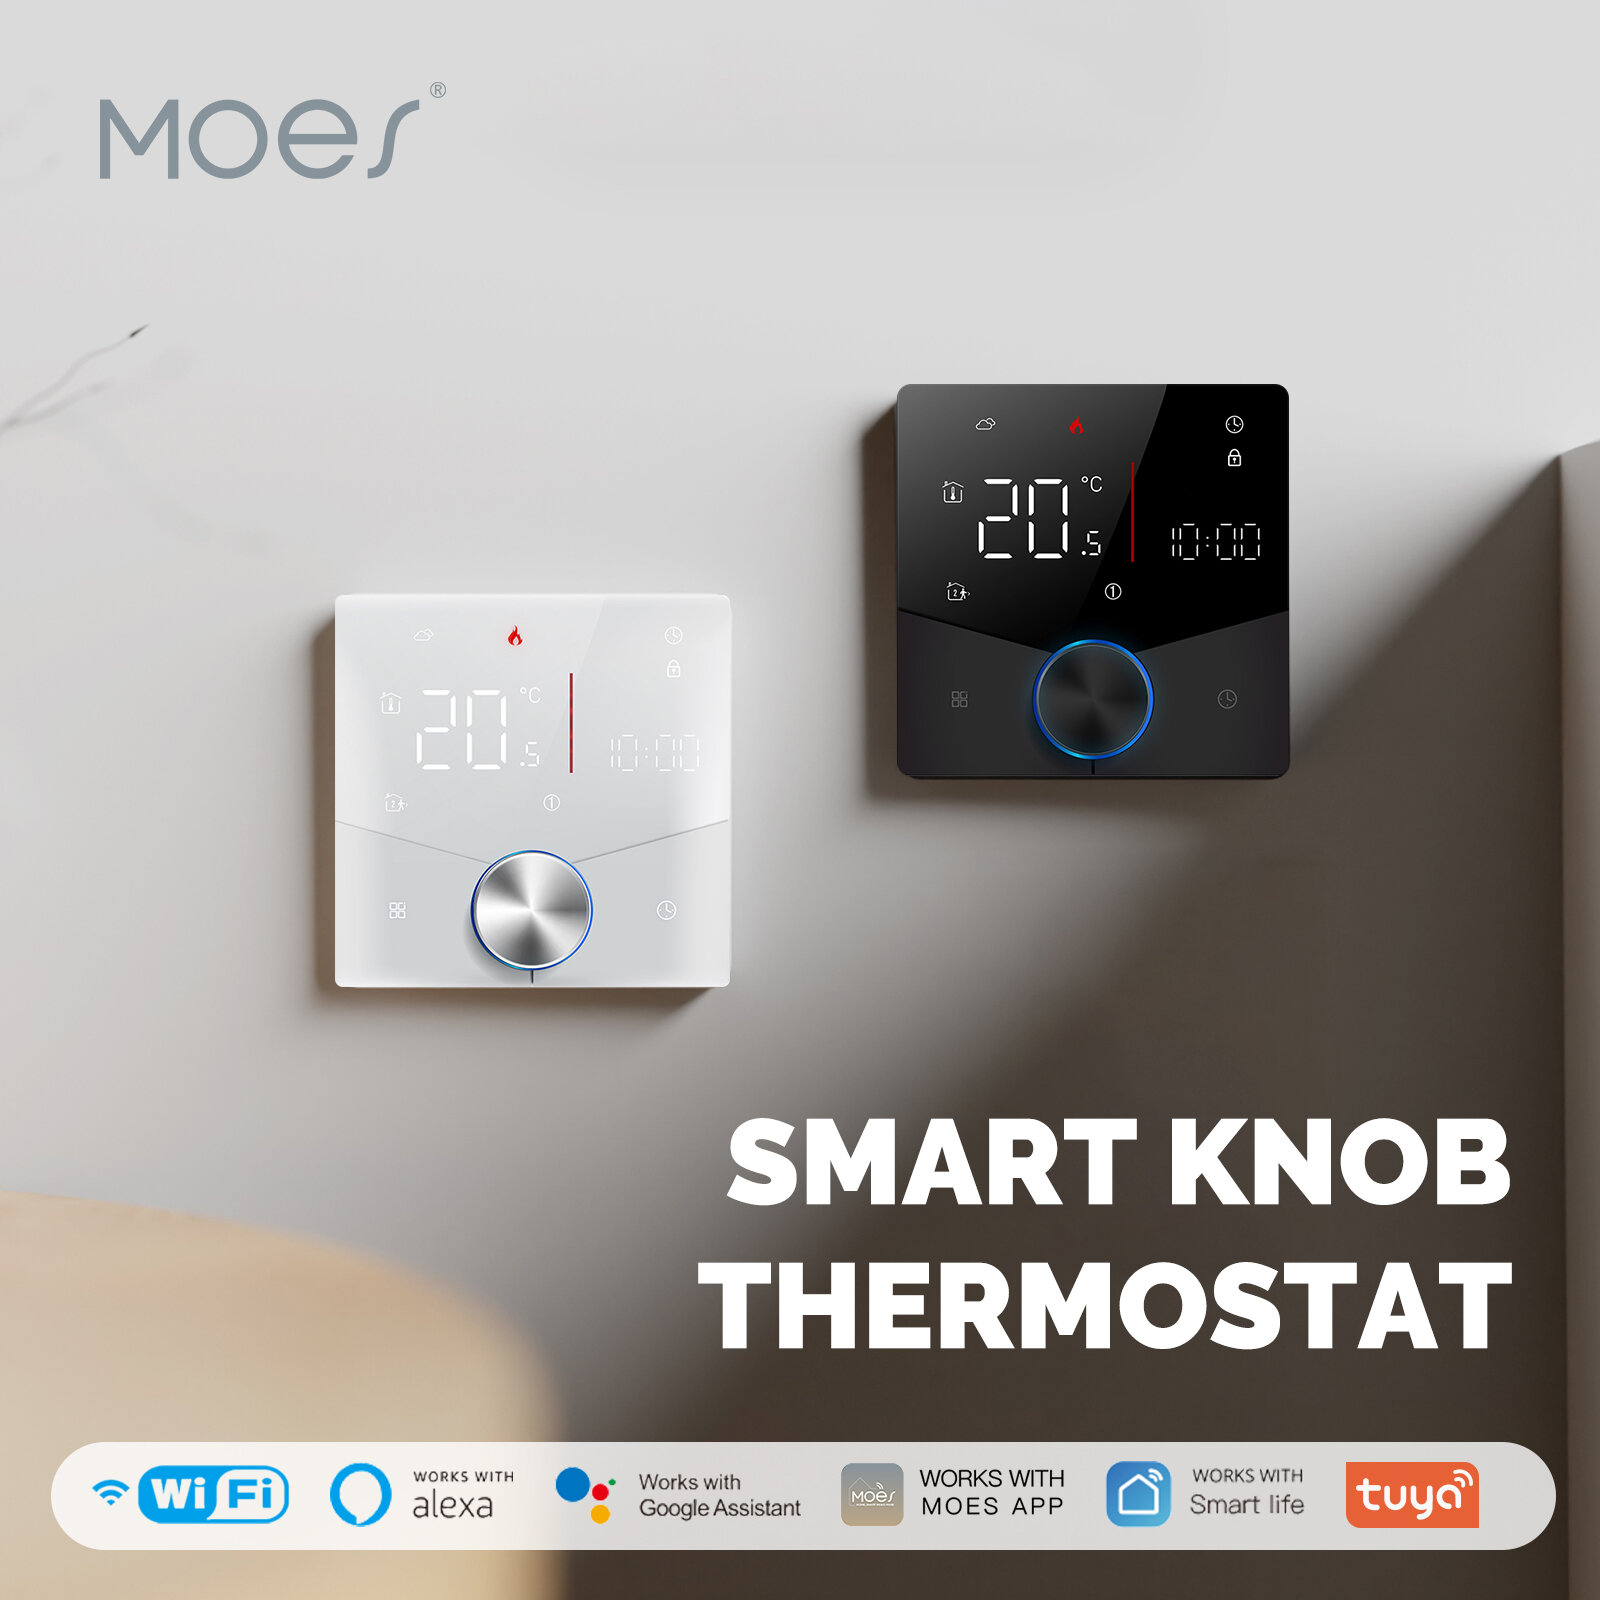 MoesHouse Tuya Smart WiFi Knob Thermostat LCD Display Mobile Phone APP Control Touch Screen for Heating Water Temperature Remote Controller Work with Alexa Google Assistant